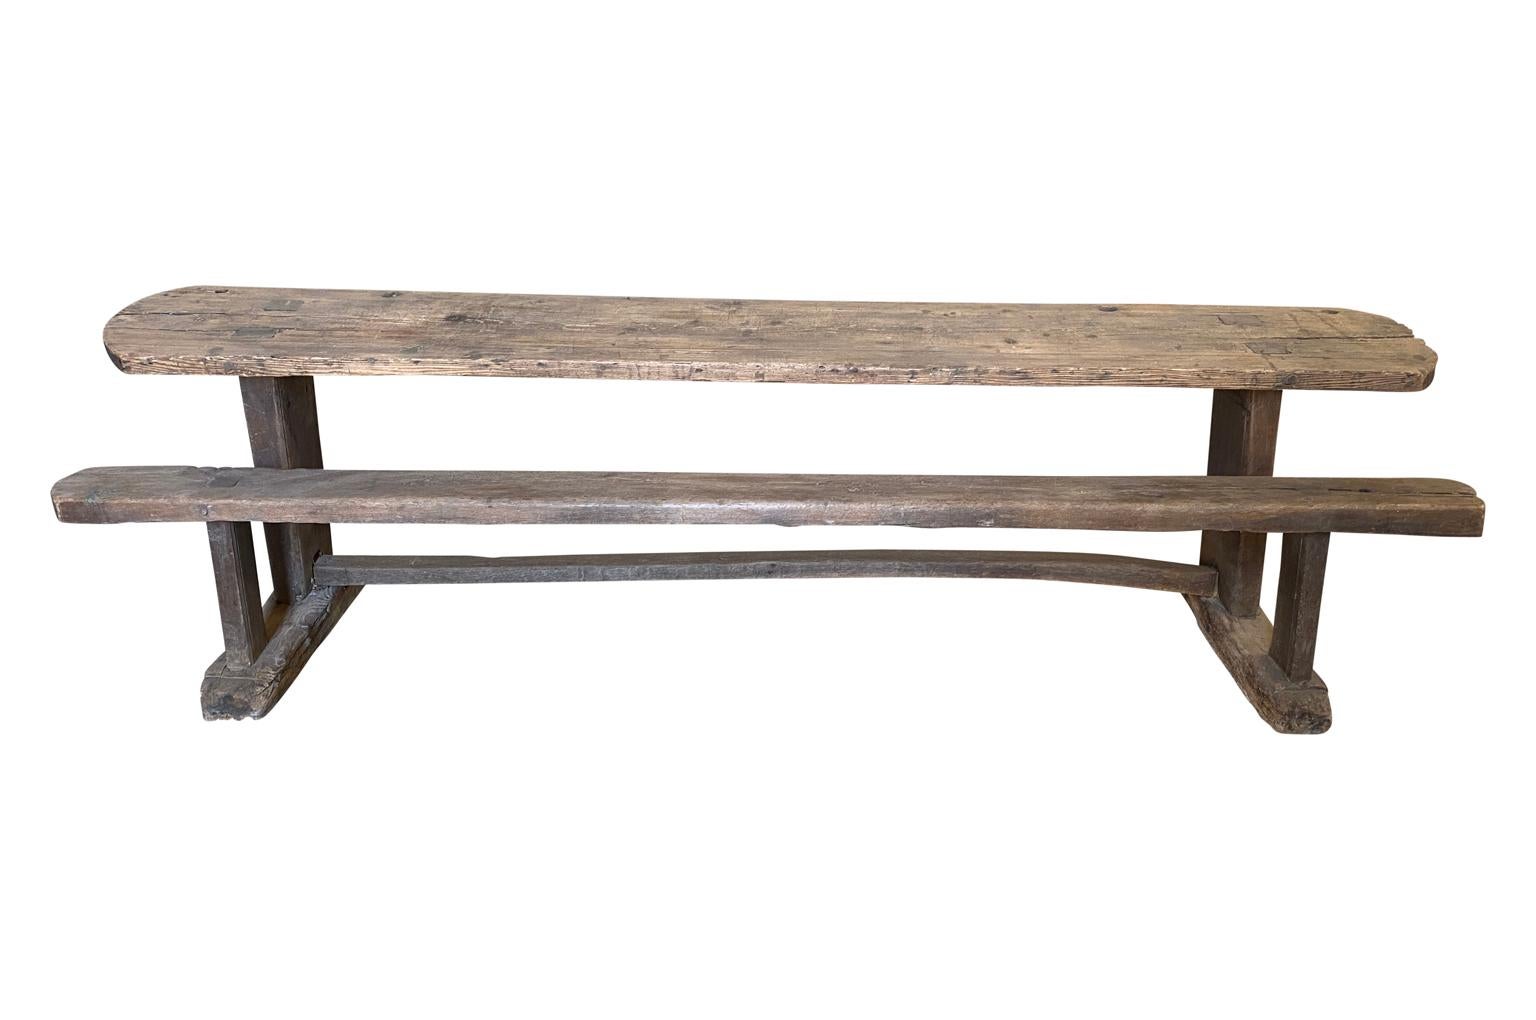 A wonderful 18th century Banc Doleance - Grievance Bench from the South of France in naturally washed wood. A terrific bench from which one can eat from while watching television, working or playing video games.